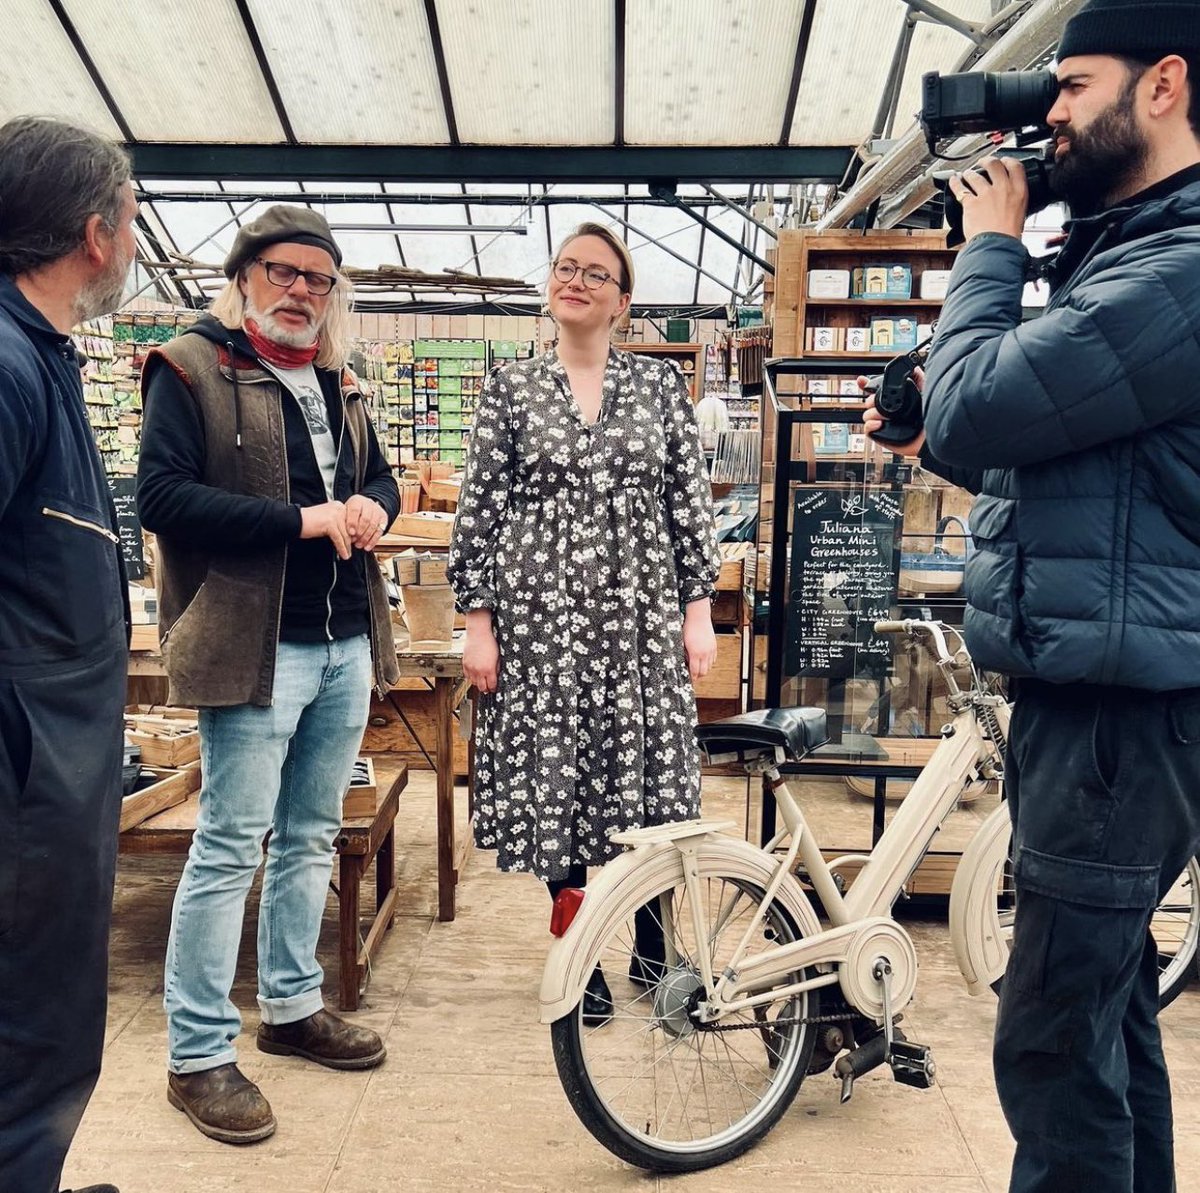 Yesterday we made a little trip to @burfordgarden for some filming of the new series of Shed and Buried. I love a trip to Burford! #henrycole #burfordgardencompany #shedandburied #cotswolds